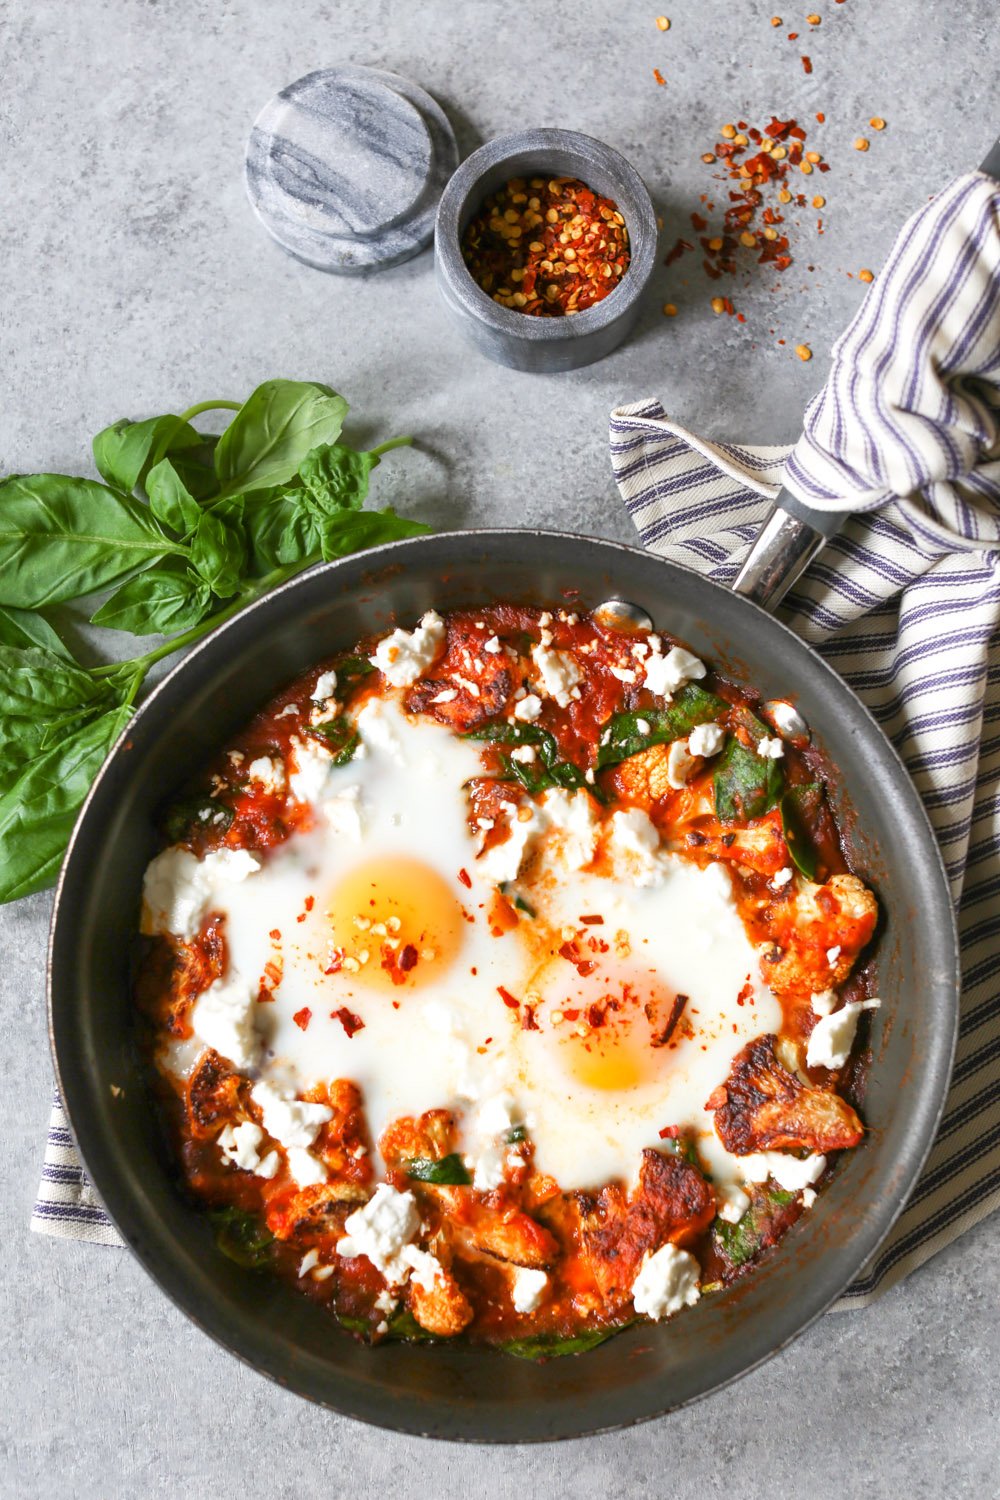 5-ingredient Skillet Eggs with Spinach and Roasted Cauliflower